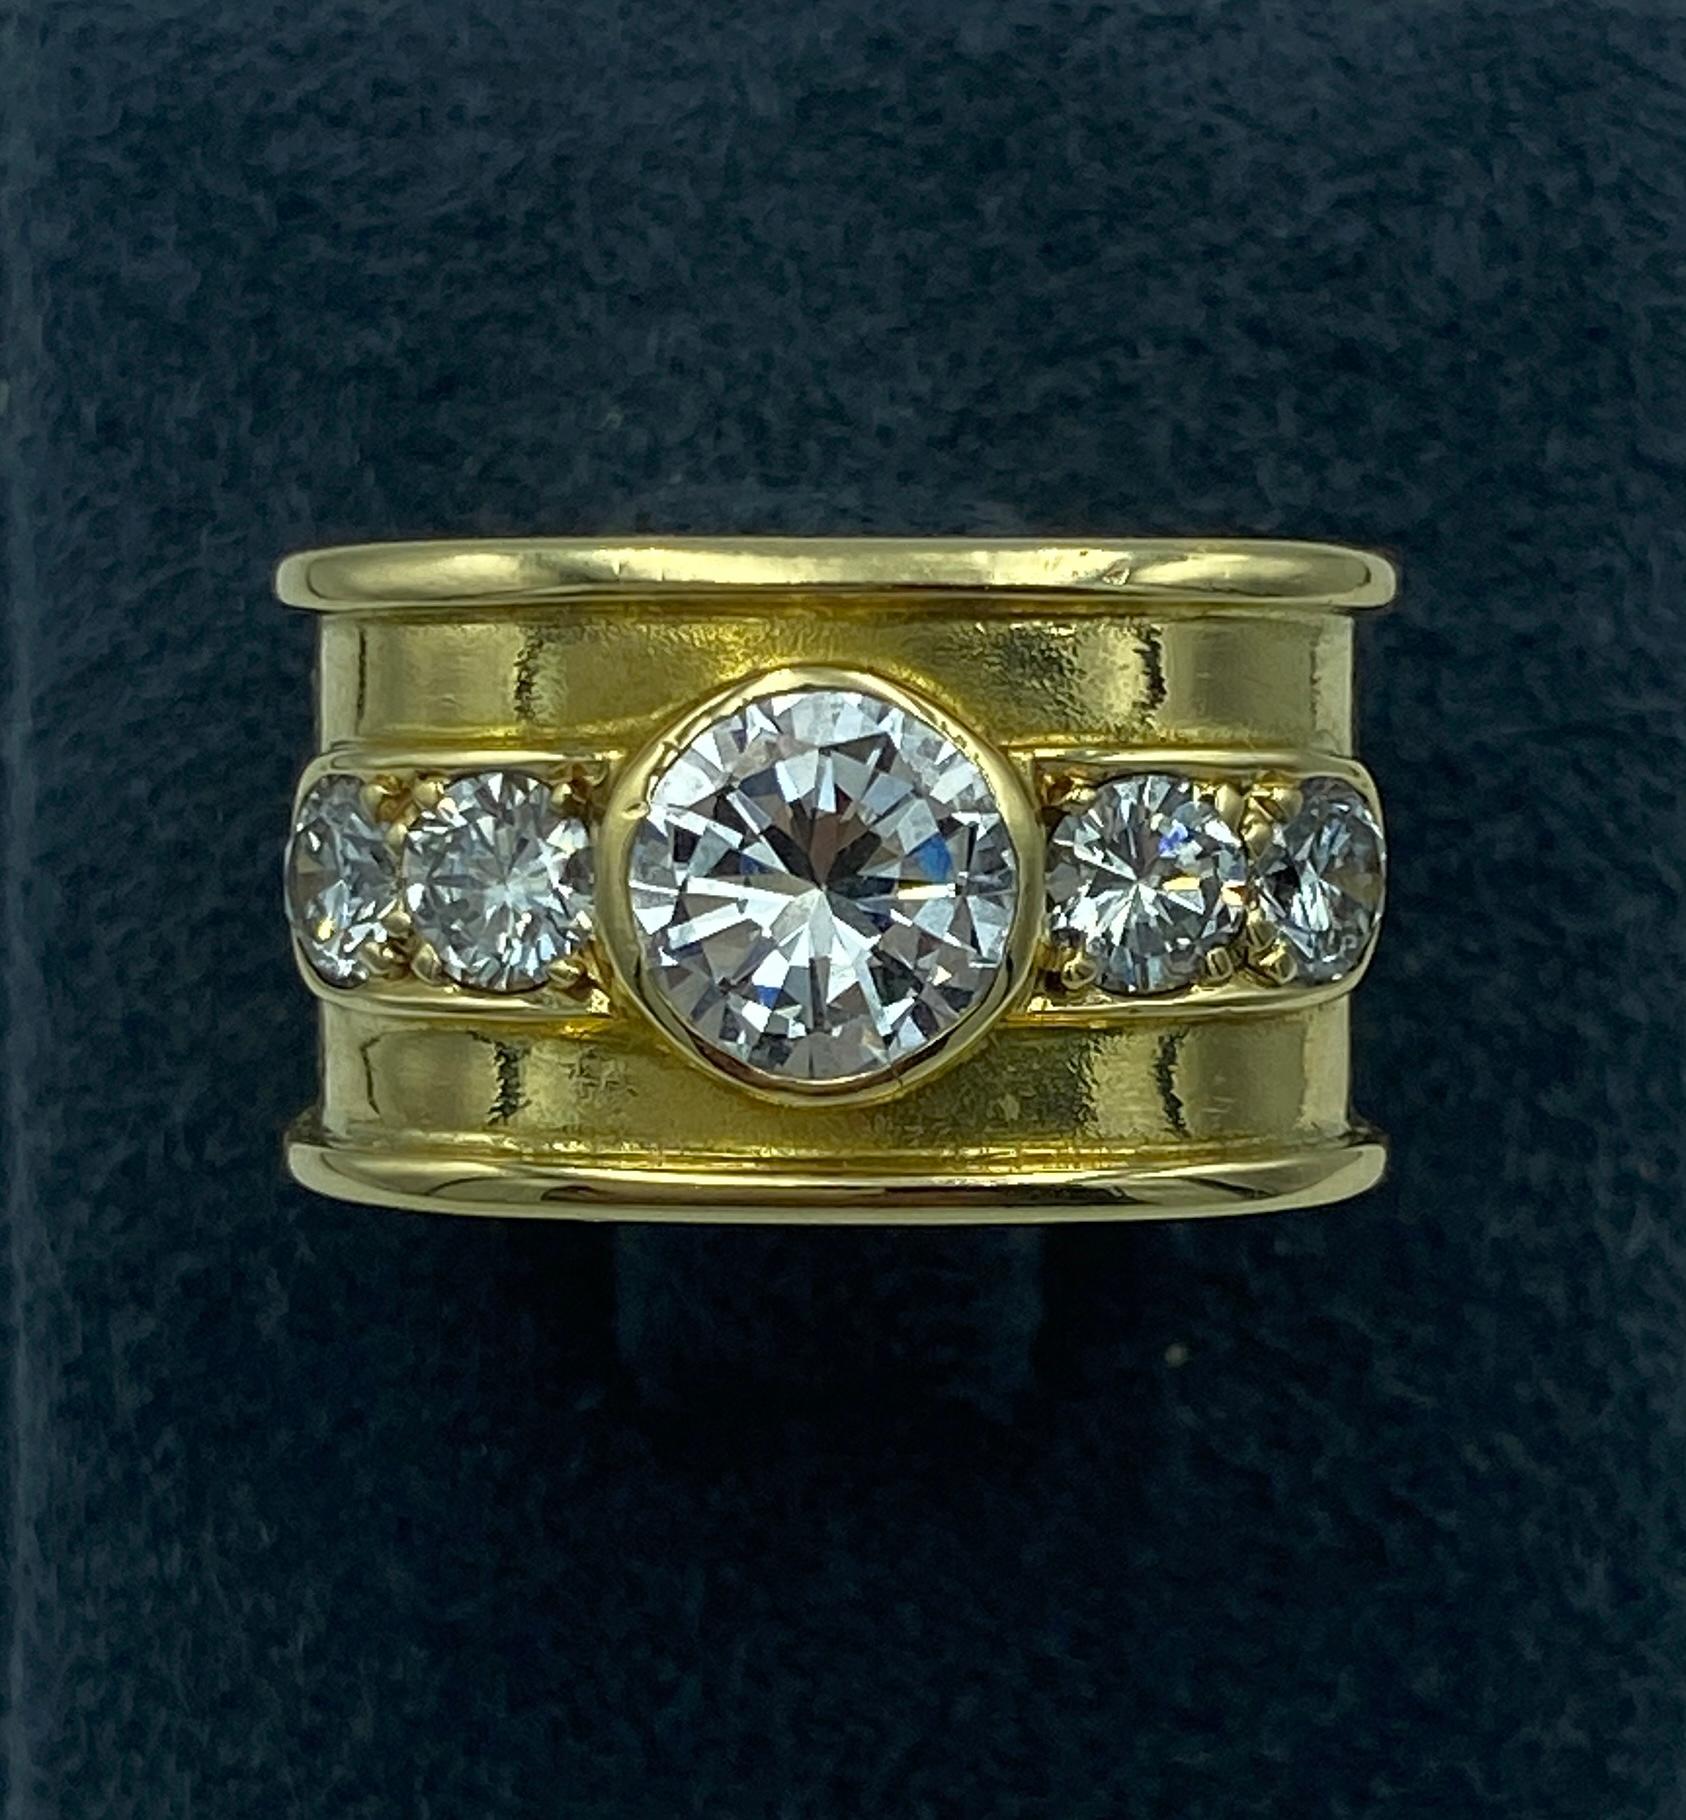 A striking 1970s Italian made 18 carat and diamond cocktail ring. The ring has a rounded angular shape. Its centre stone is approximately 1 carat and the 4 smaller round cut diamonds are approximately 0.25 carat.

It is a most elegant ring that can